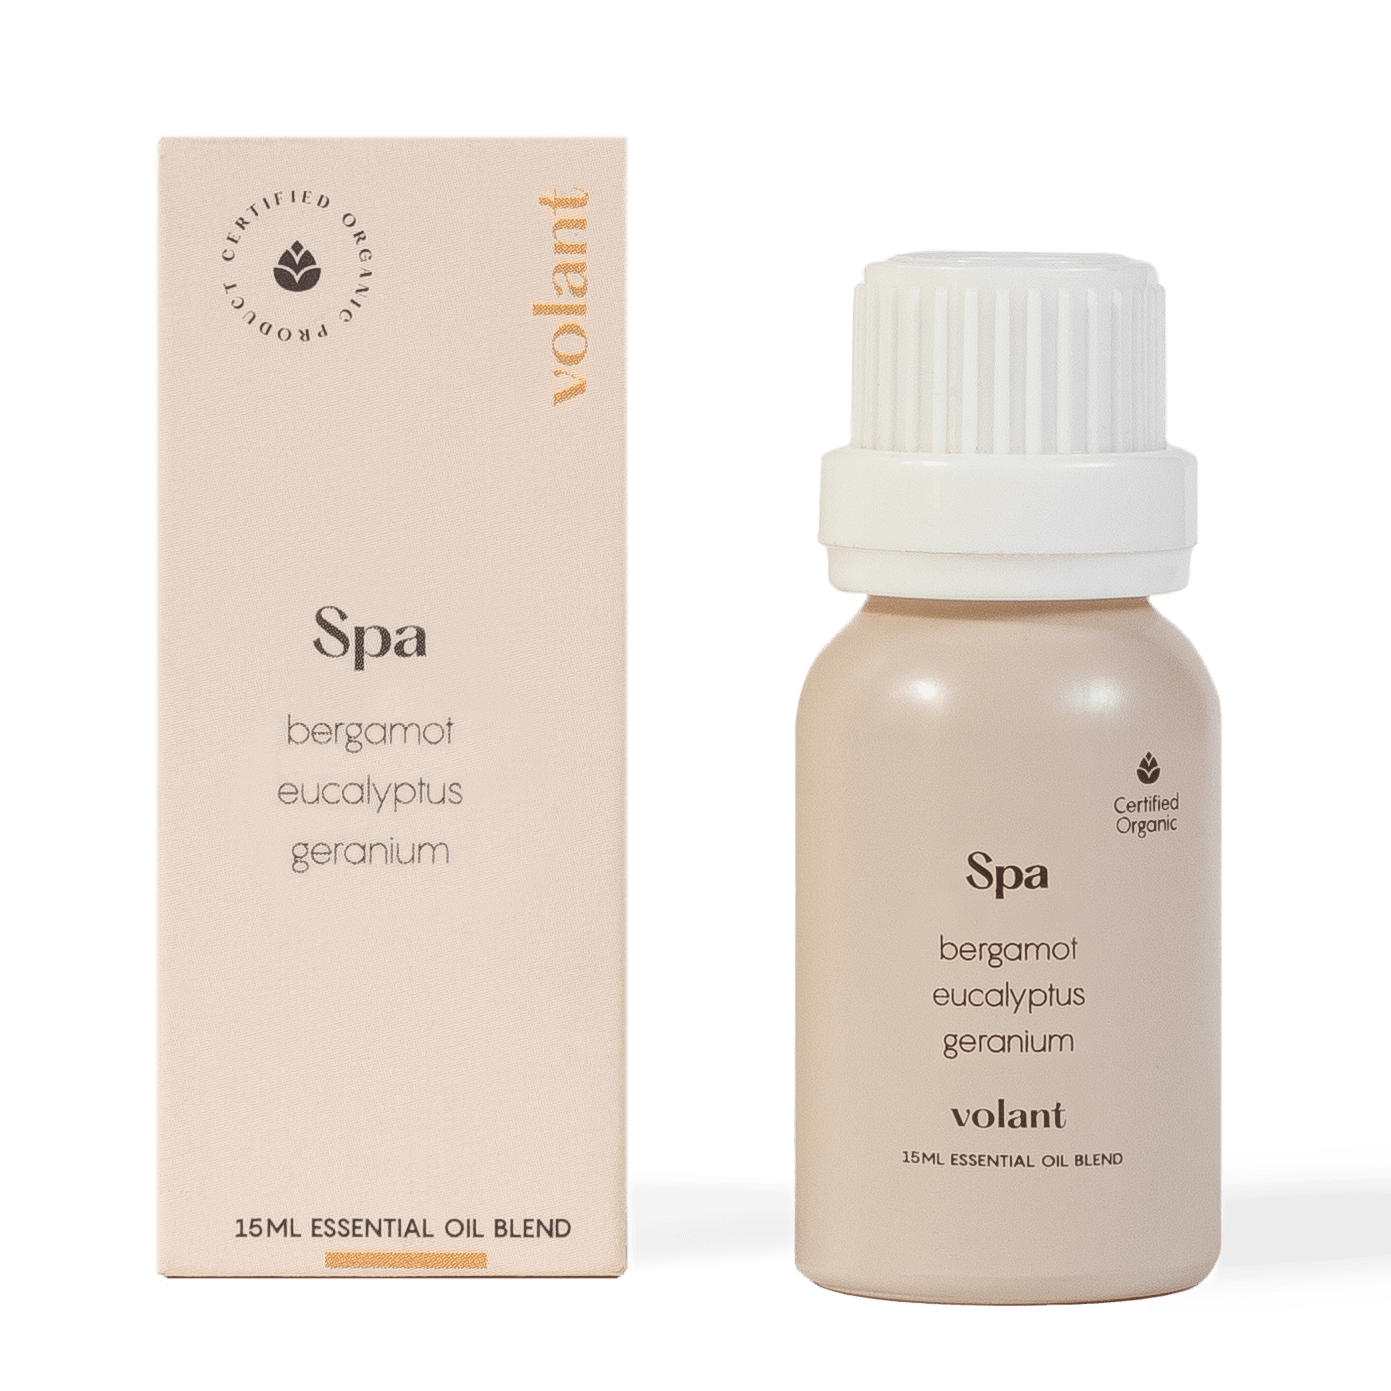 volant spa essential oil blend bottle packaging. Made with pure Eucalyptus, Geranium, and Bergamot it recreates the calming and refreshing spa feeling.